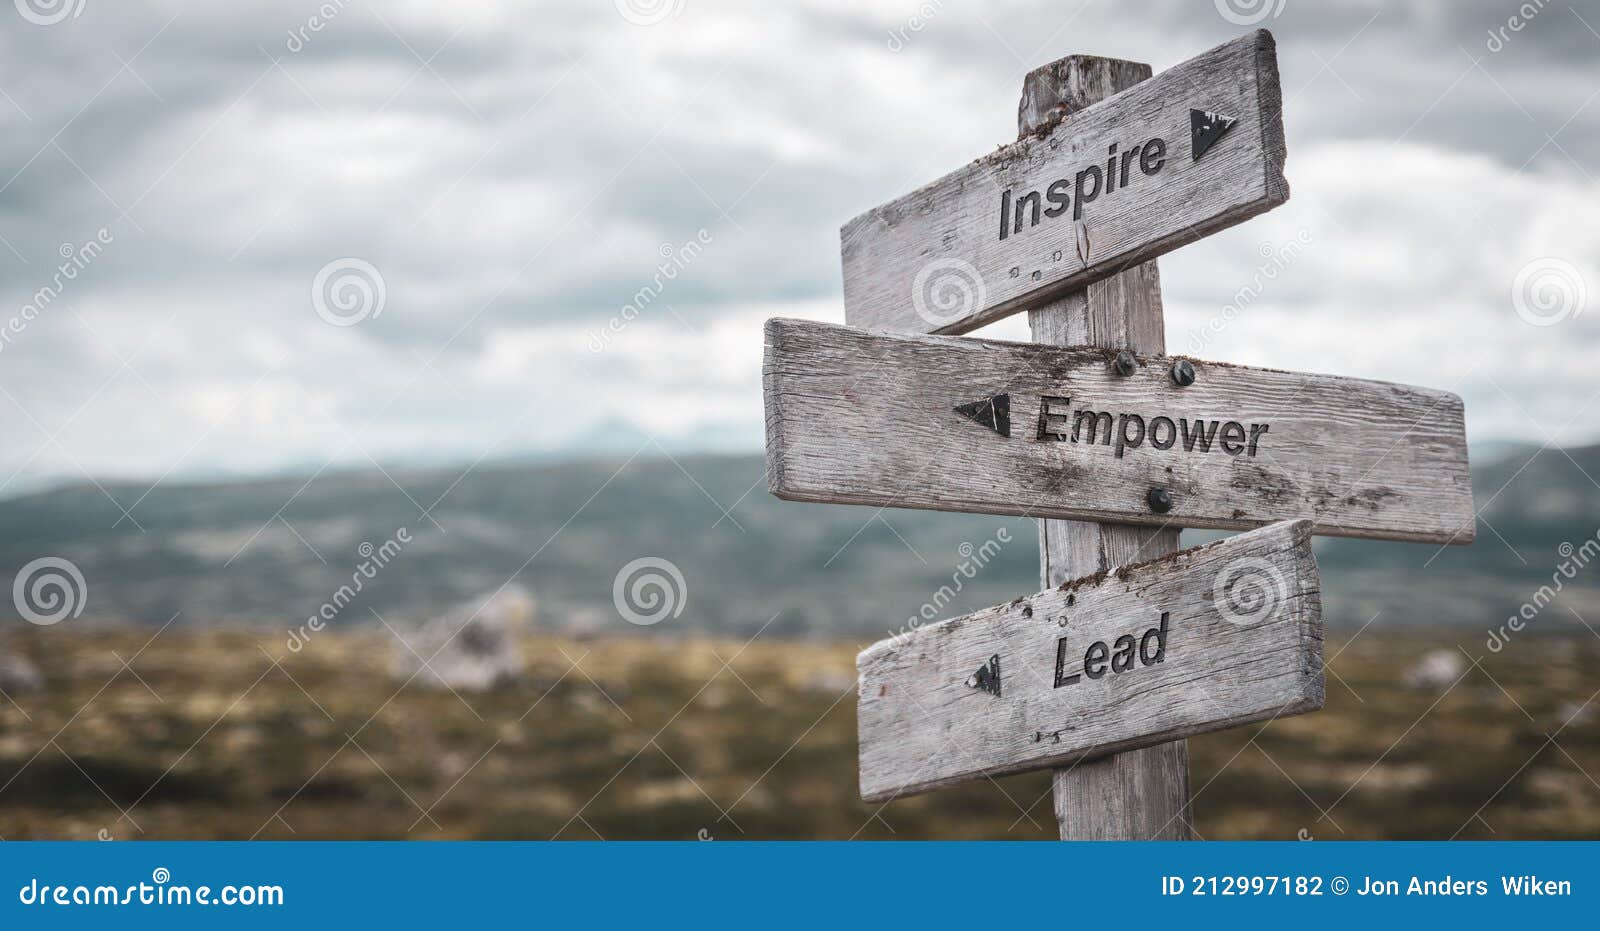 inspire empower lead text engraved on wooden signpost outdoors in nature.